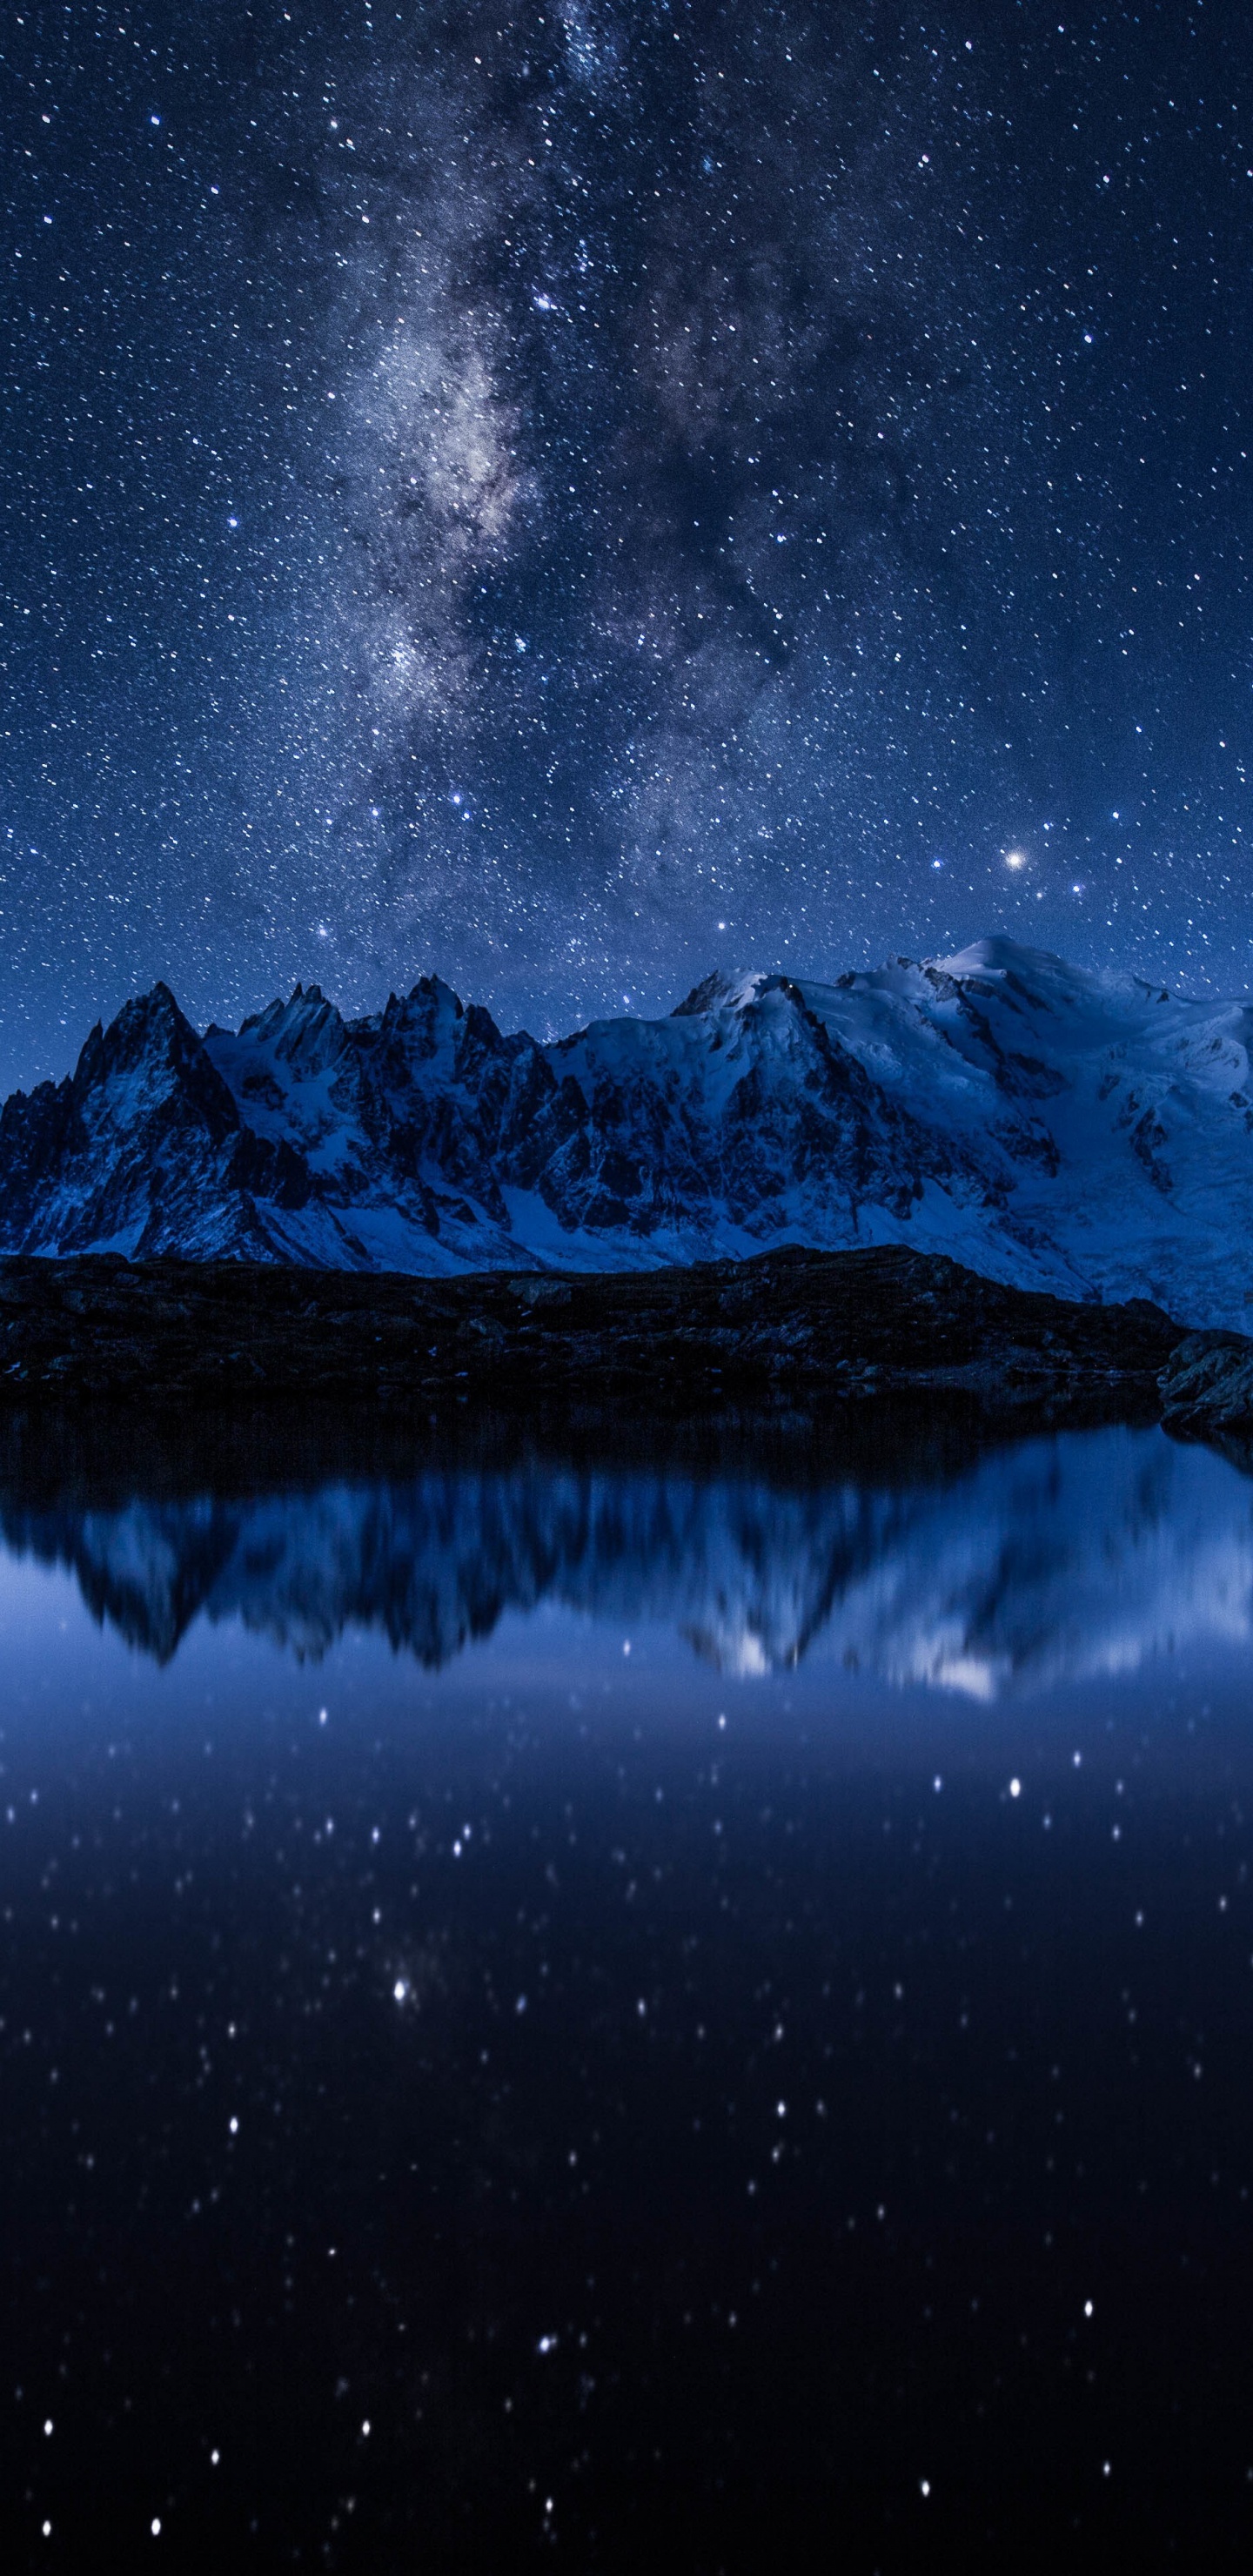 Snow Covered Mountain During Night Time. Wallpaper in 1440x2960 Resolution